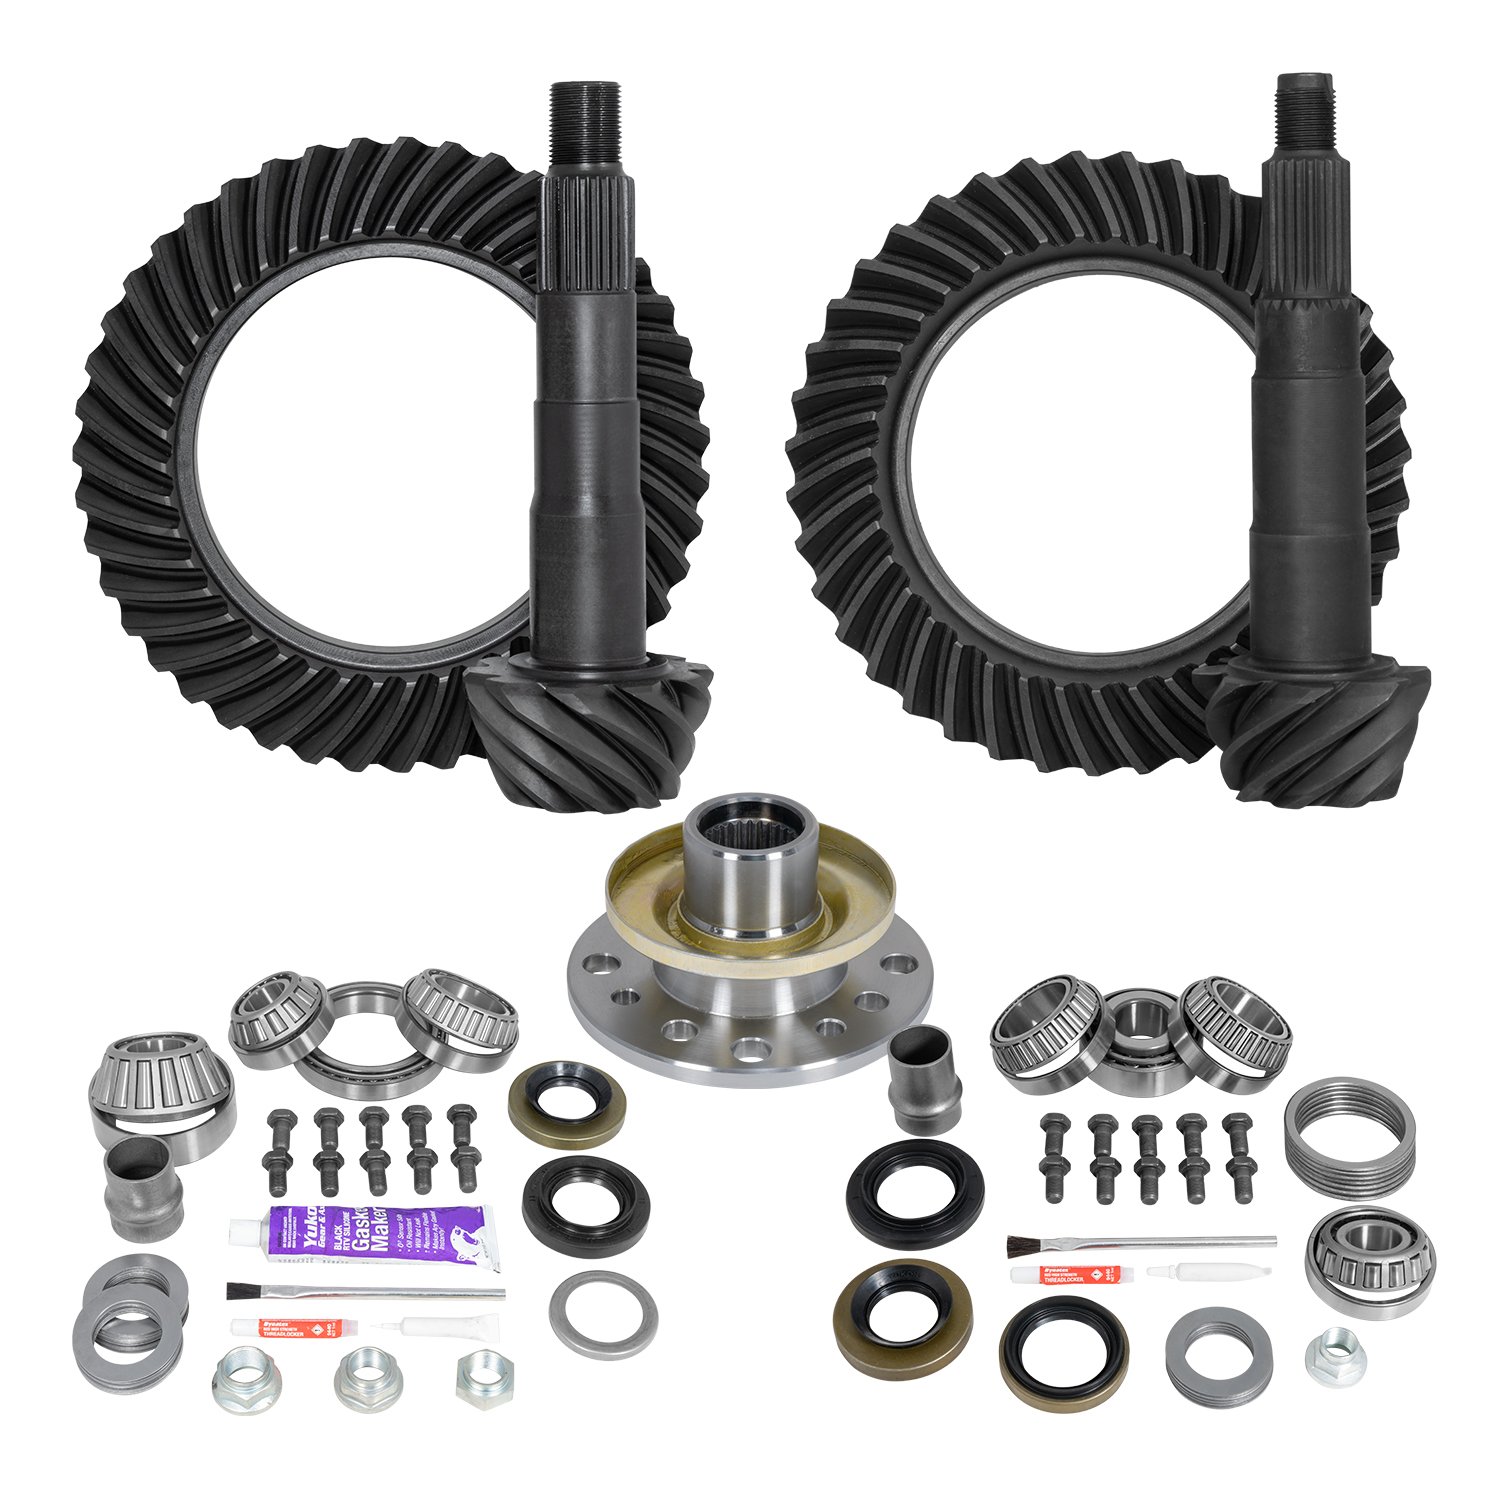 Ring & Pinion Gear Kit Package Front & Rear With Install Kits - Toyota 8/7.5R